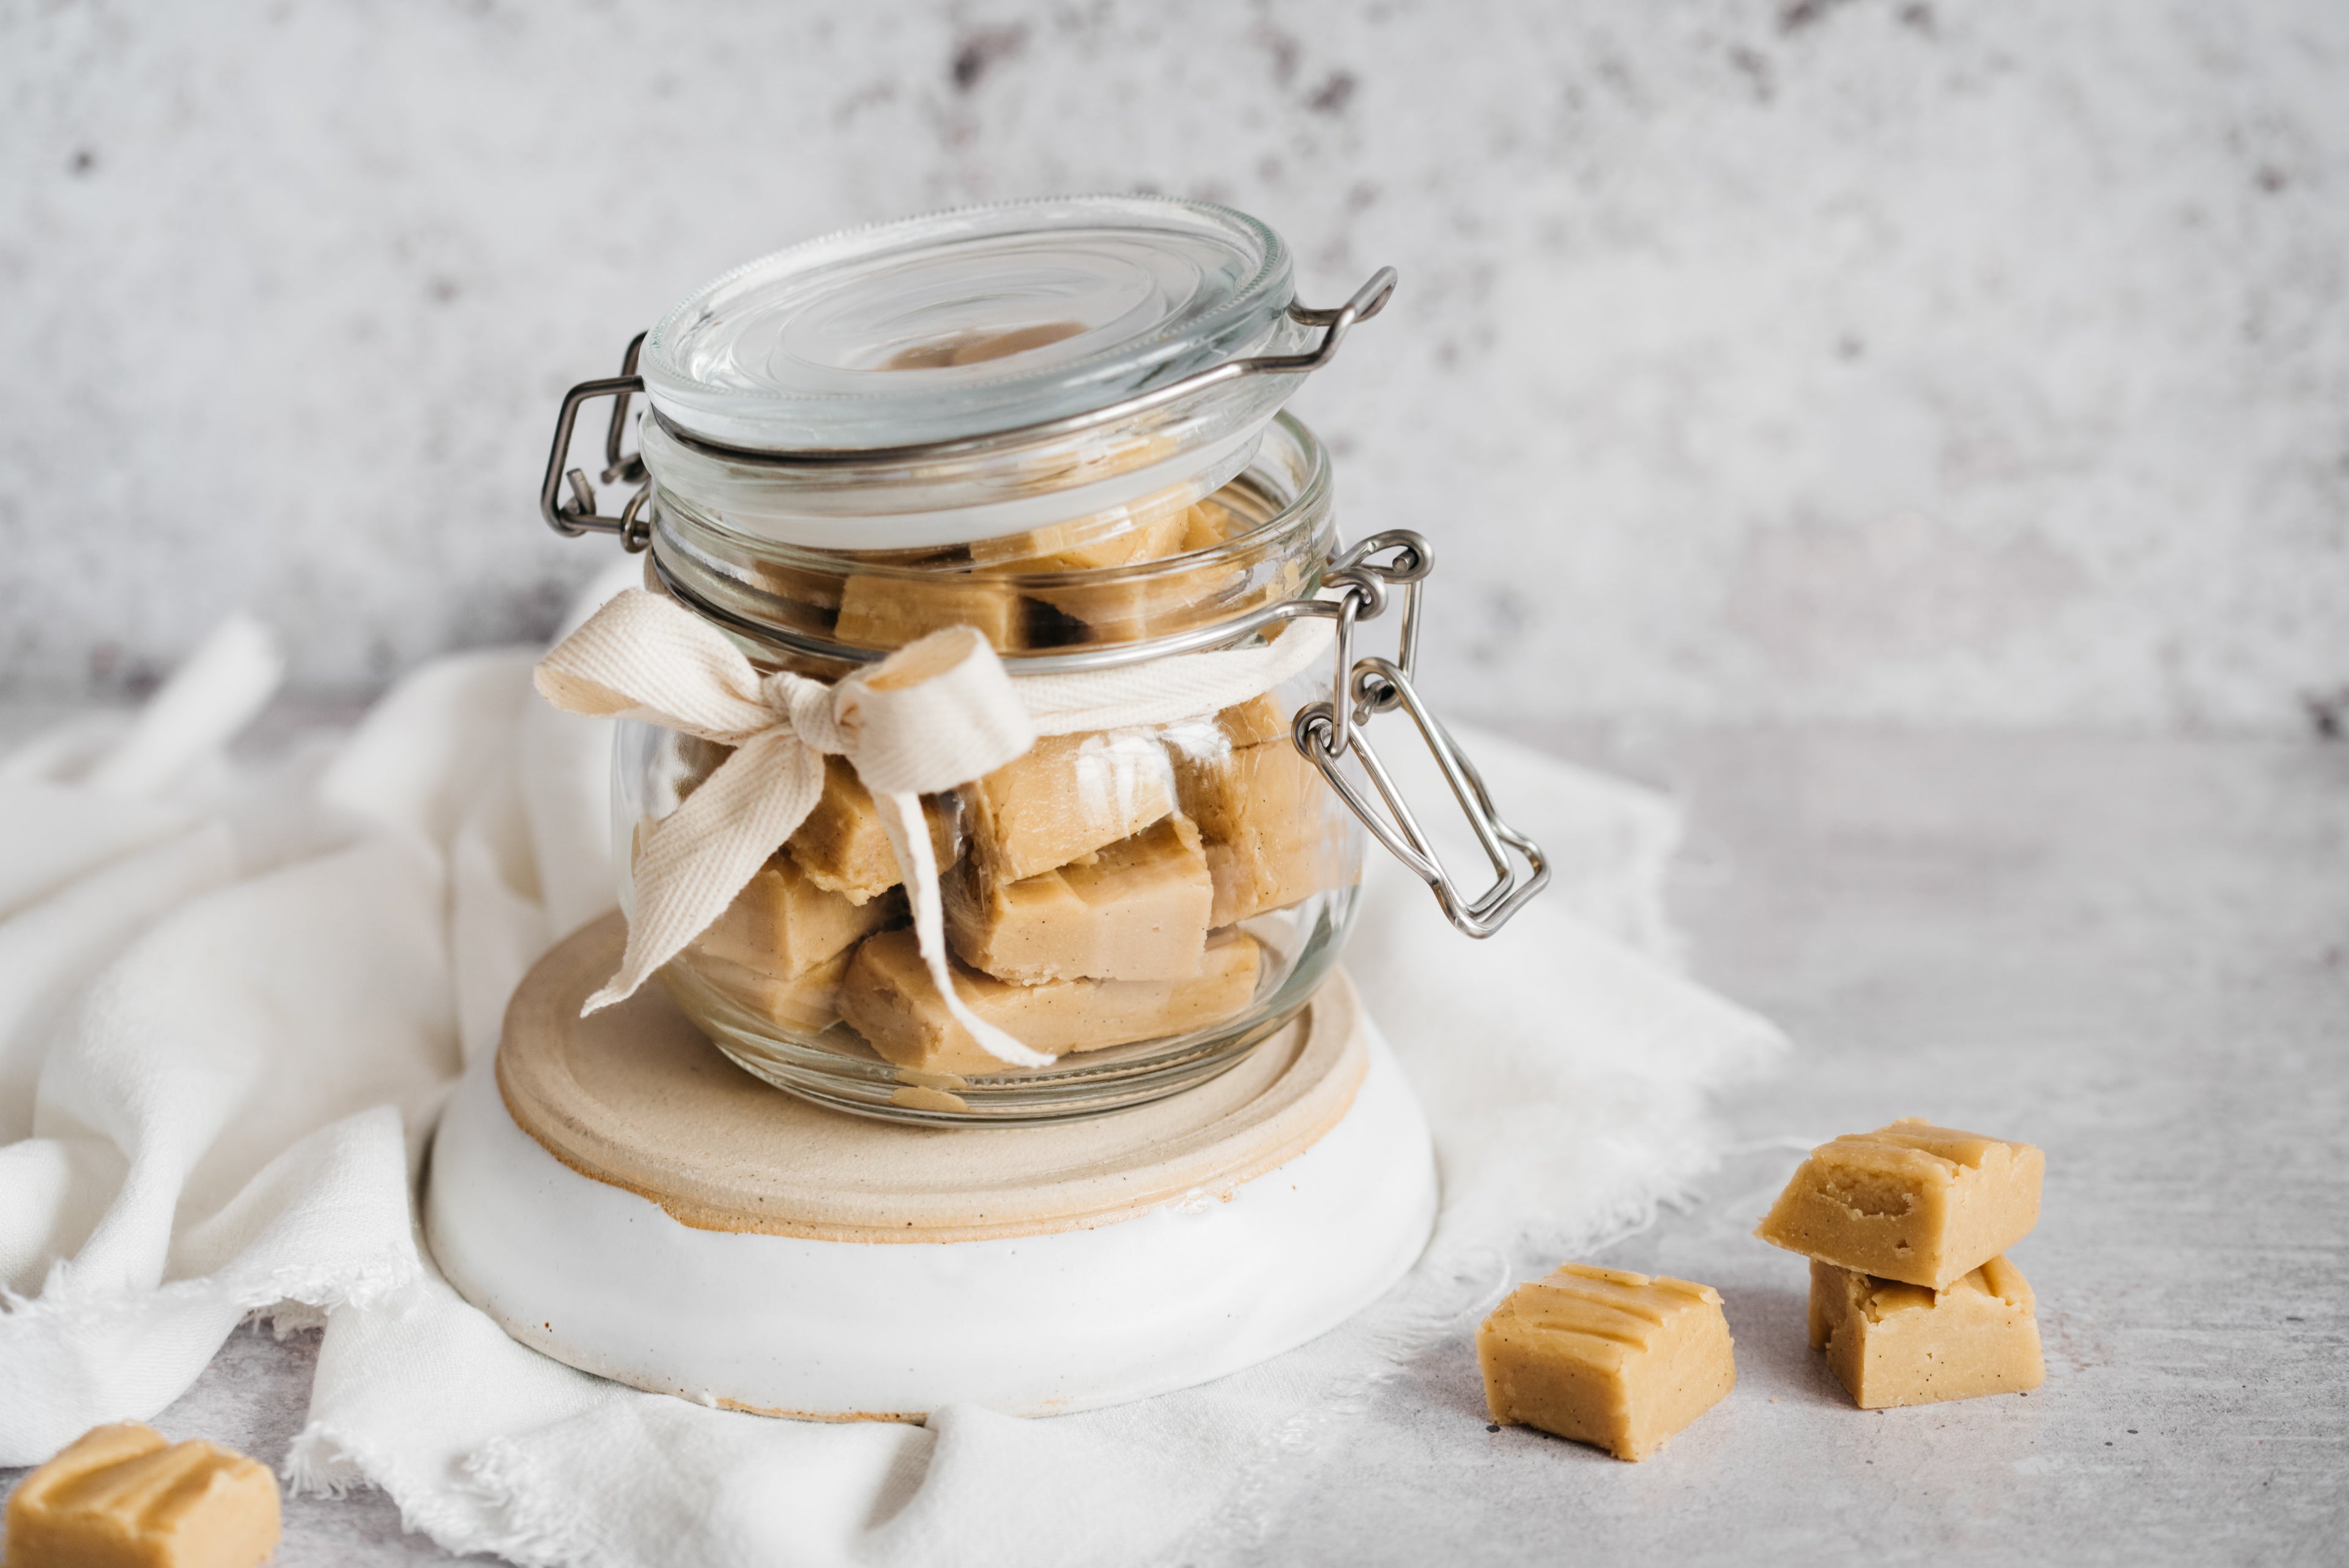 Cubes of vanilla fudge in an open kilner jar decorated with a cream ribbon bow. 4 cubes of fudge in the forefront